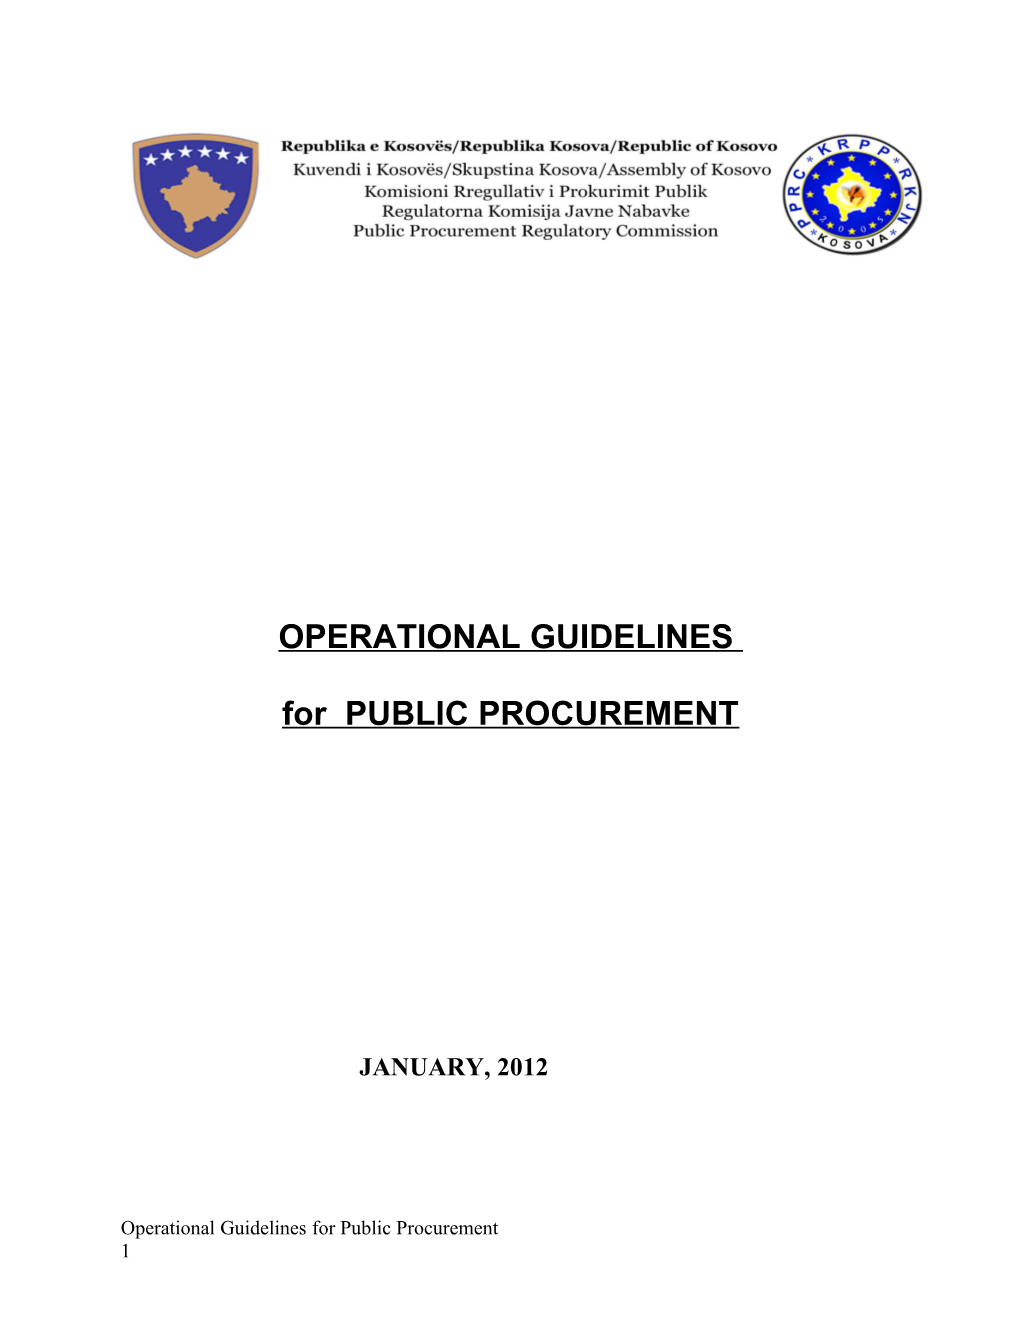 Operational Guidelines